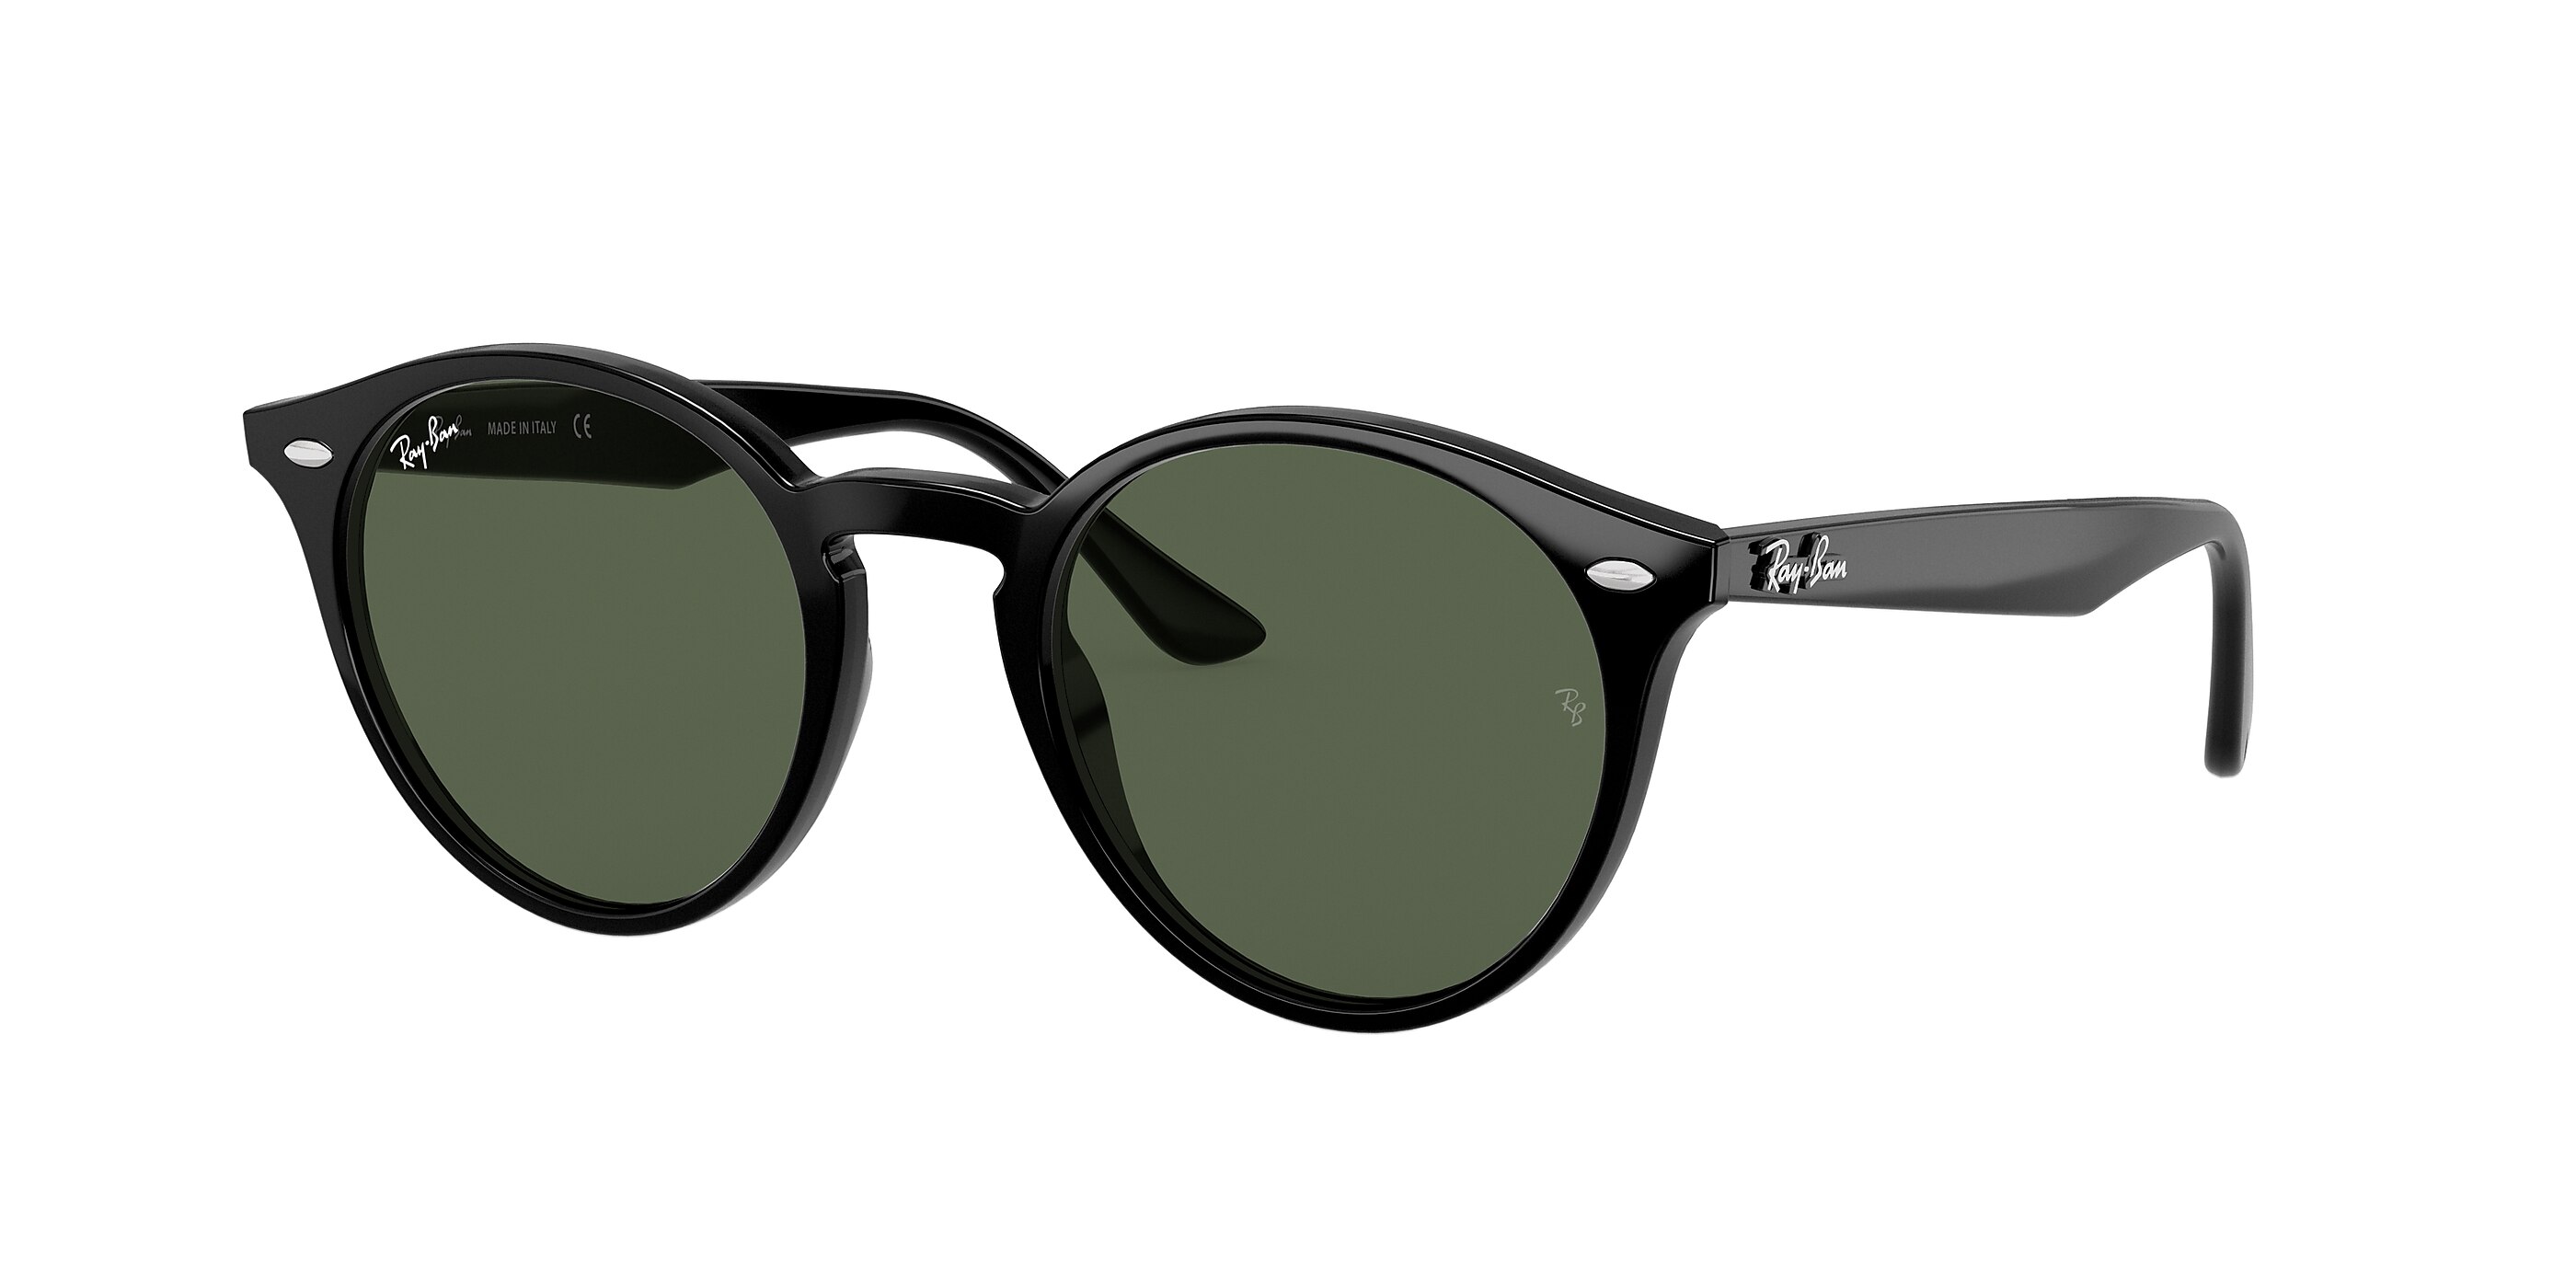 Ray Ban Sunglasses in Black and Green  RB2180 601 71 49